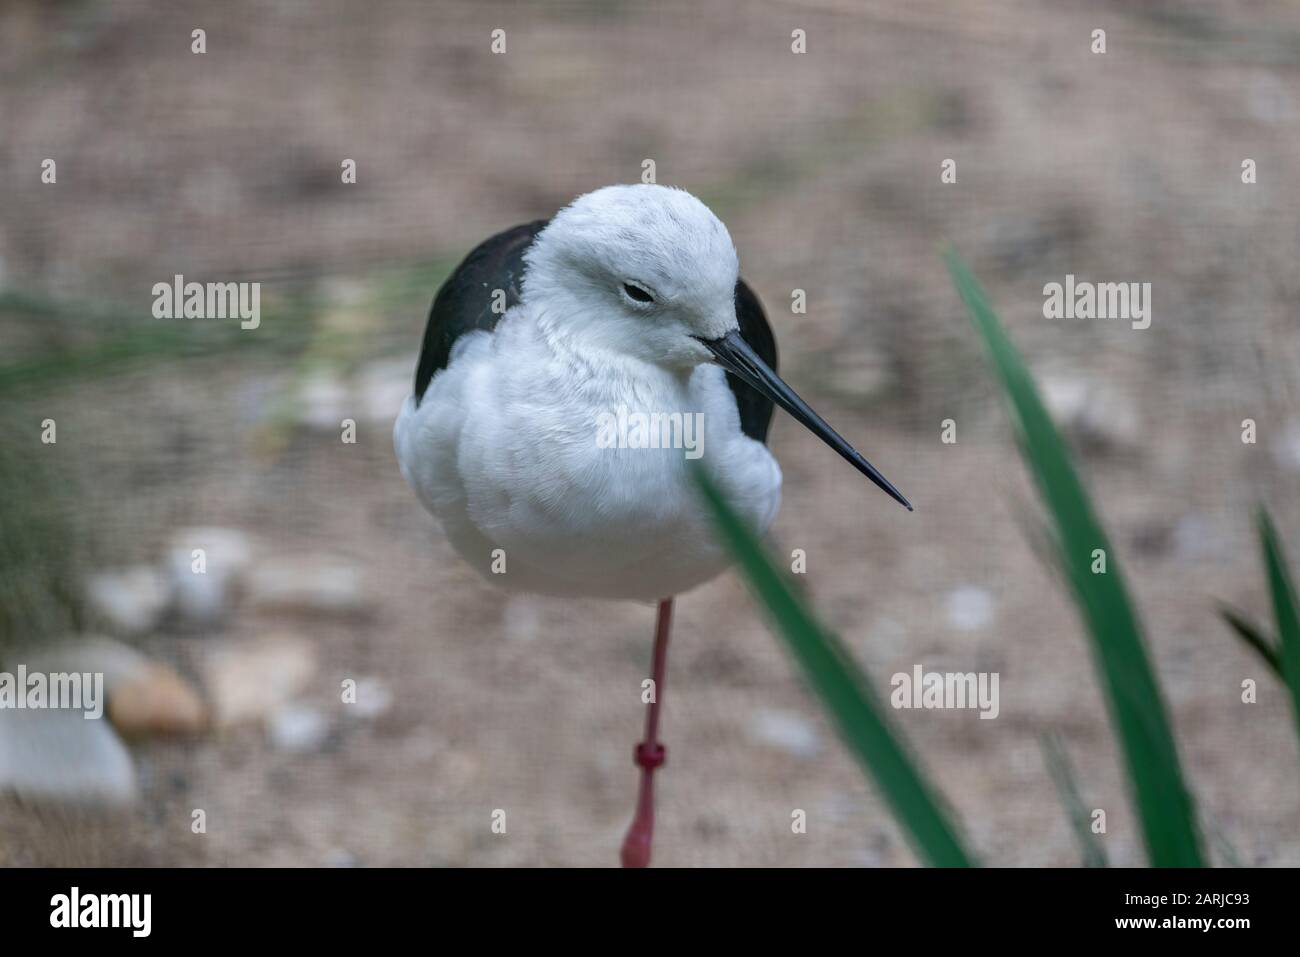 Black-winged stilt have long pink legs, a long thin black bill and are blackish above and white below, with a white head and neck with a varying amoun Stock Photo